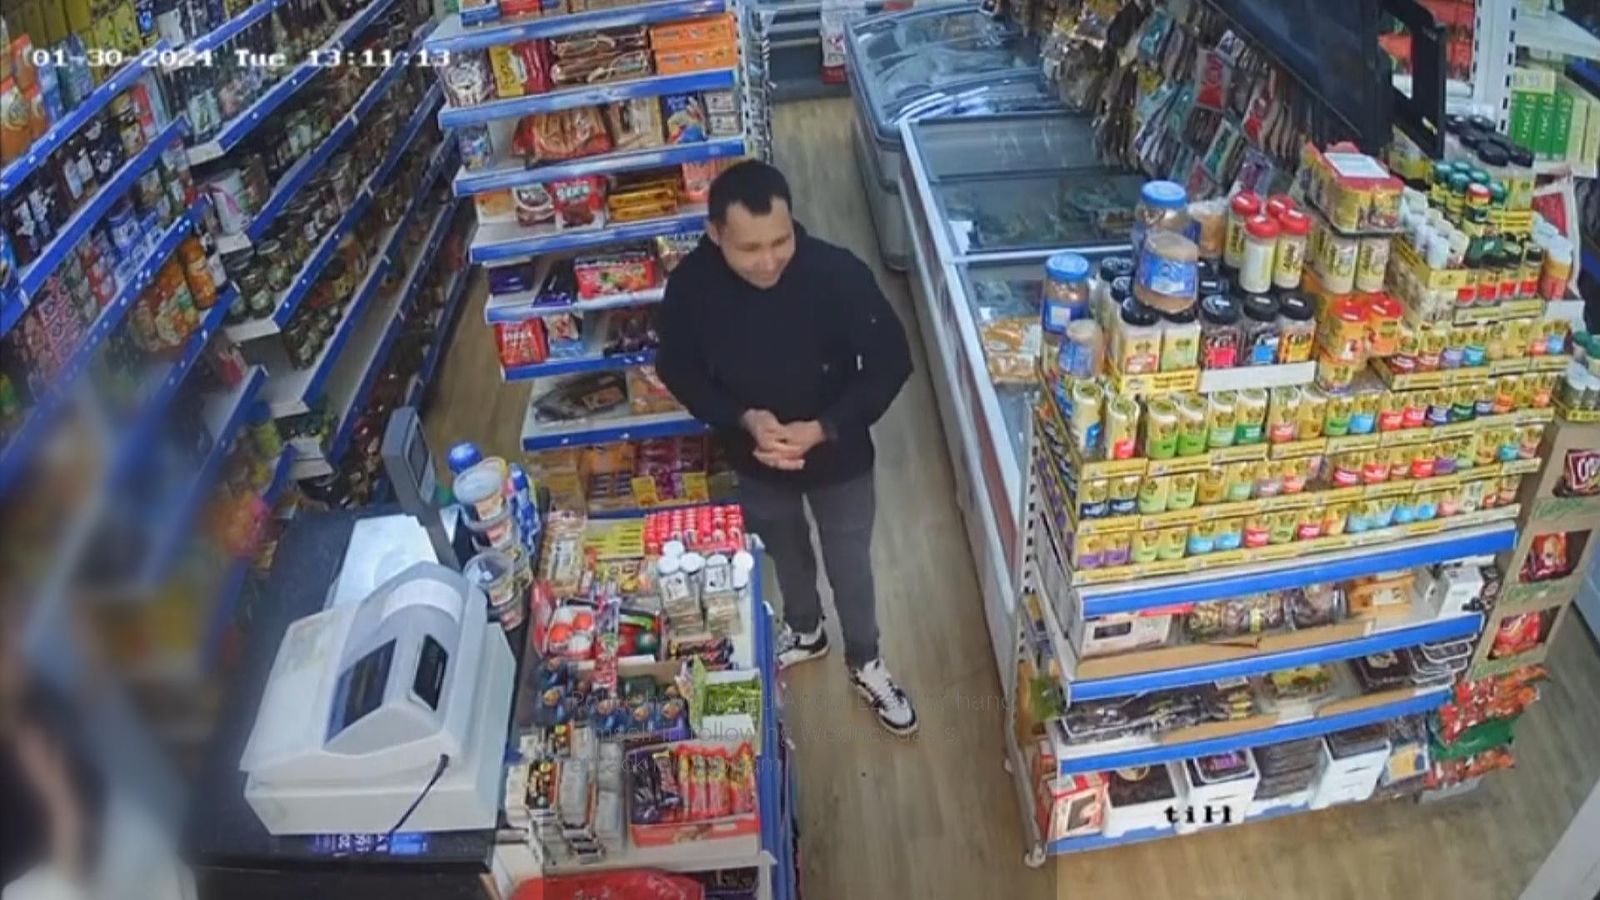 Clapham chemical attack: CCTV of suspected assailant in a shop in ...